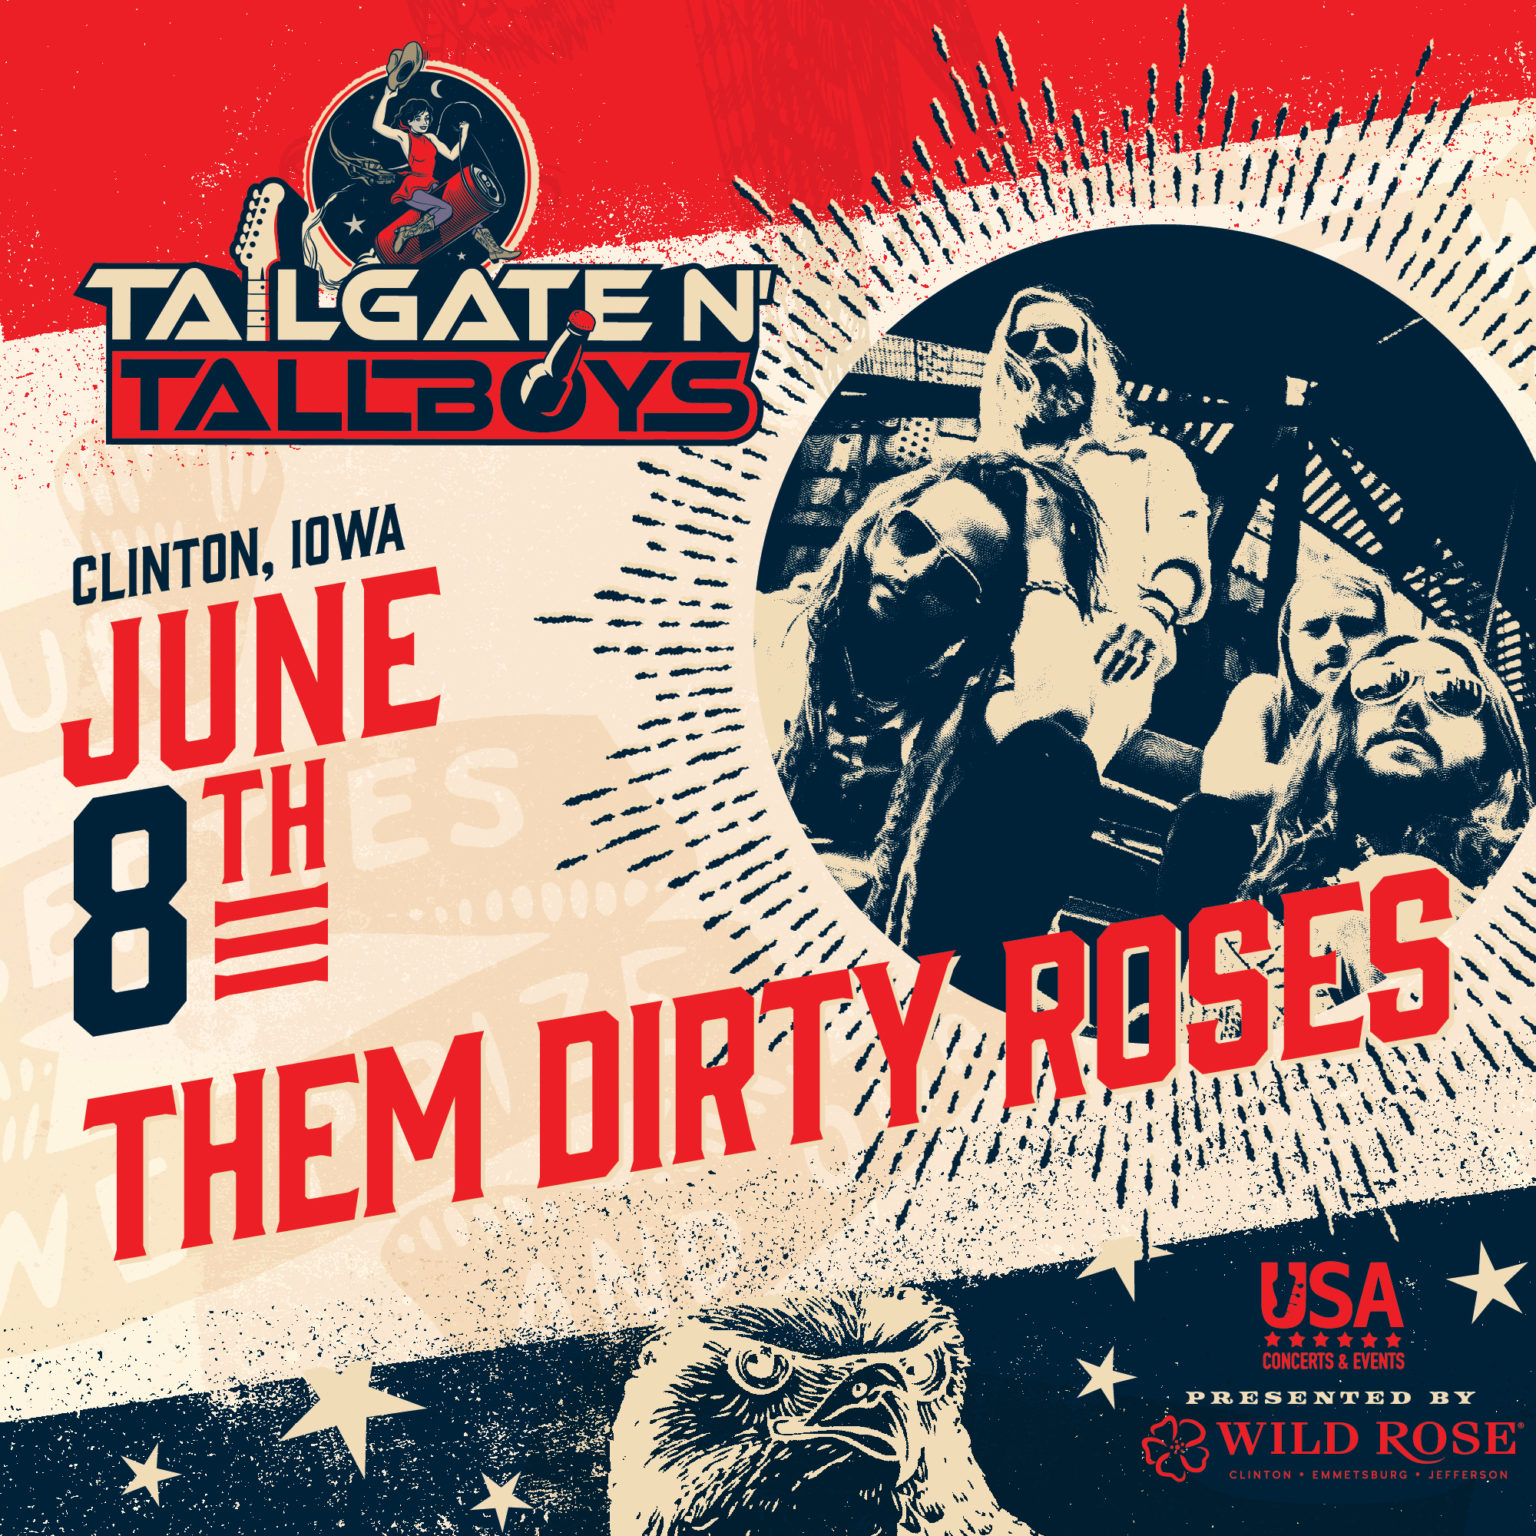 New Lineup Clinton Tailgate N' Tallboys